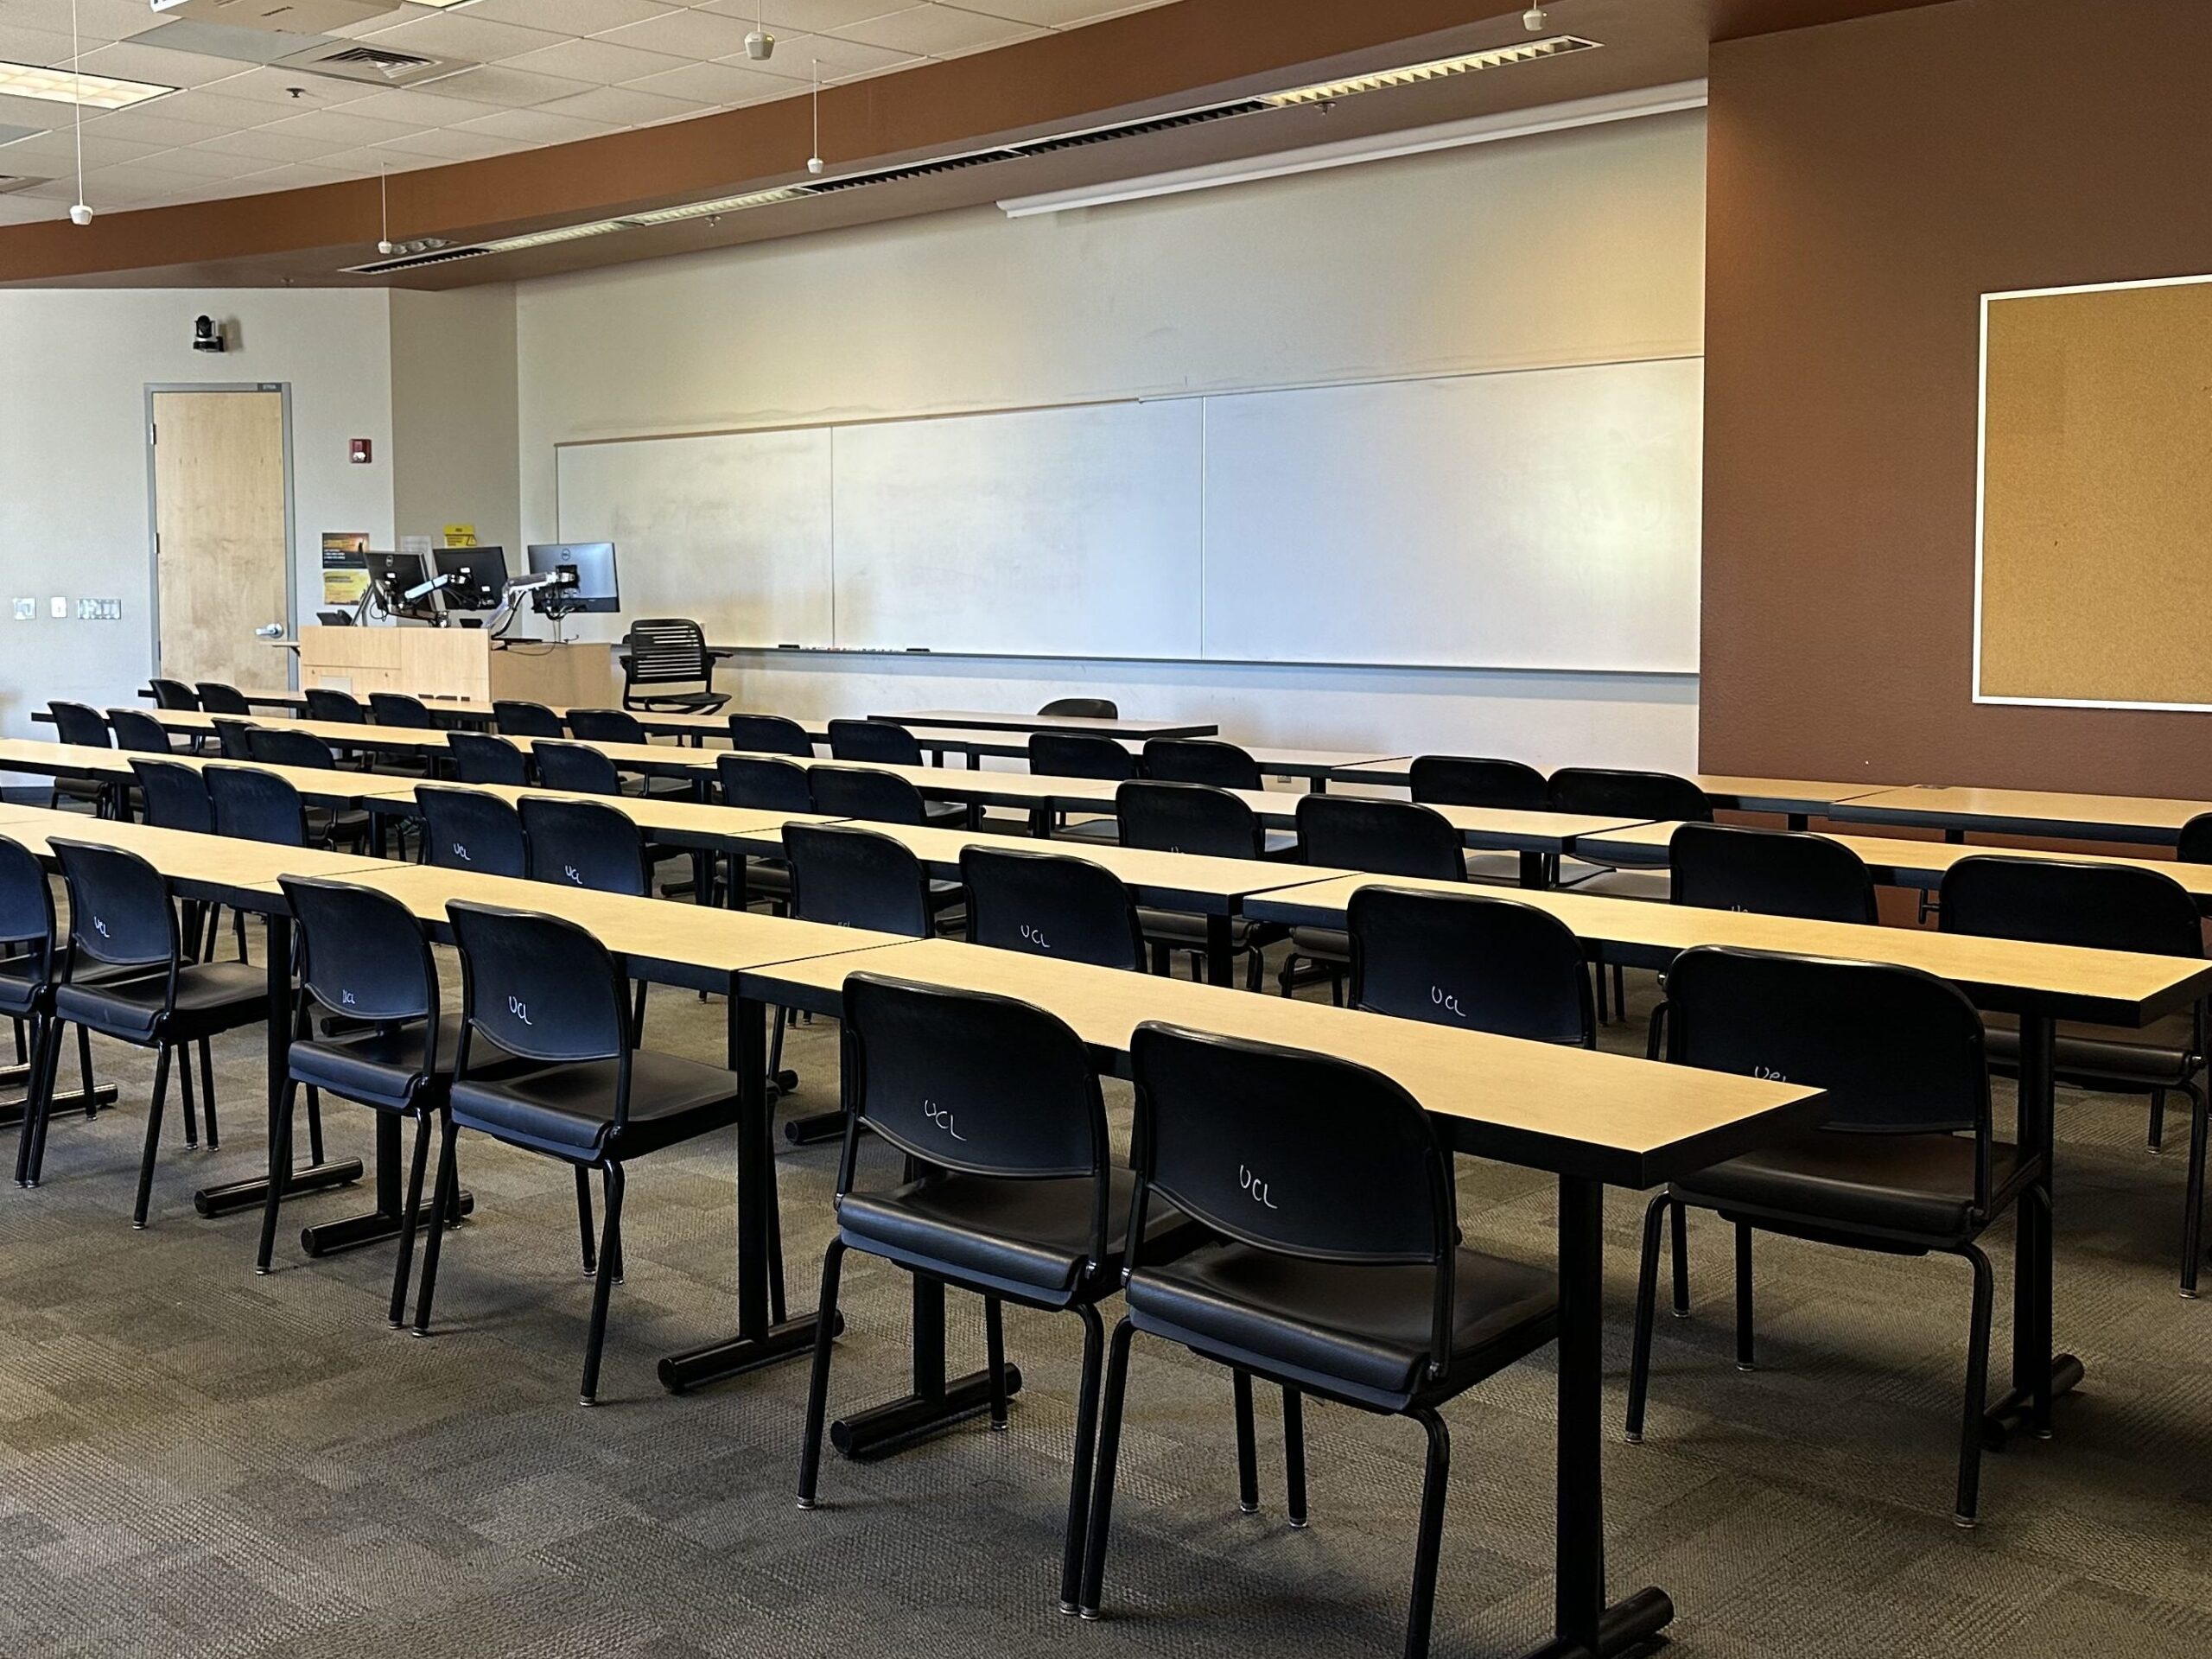 Classroom in ASU's Brickyard building. Rows of tables, lined with chairs, all facing the front of the room. The wall has a long whiteboard and instructor podium. There is a door to the left with a camera above it. From the ceiling hang microphones.